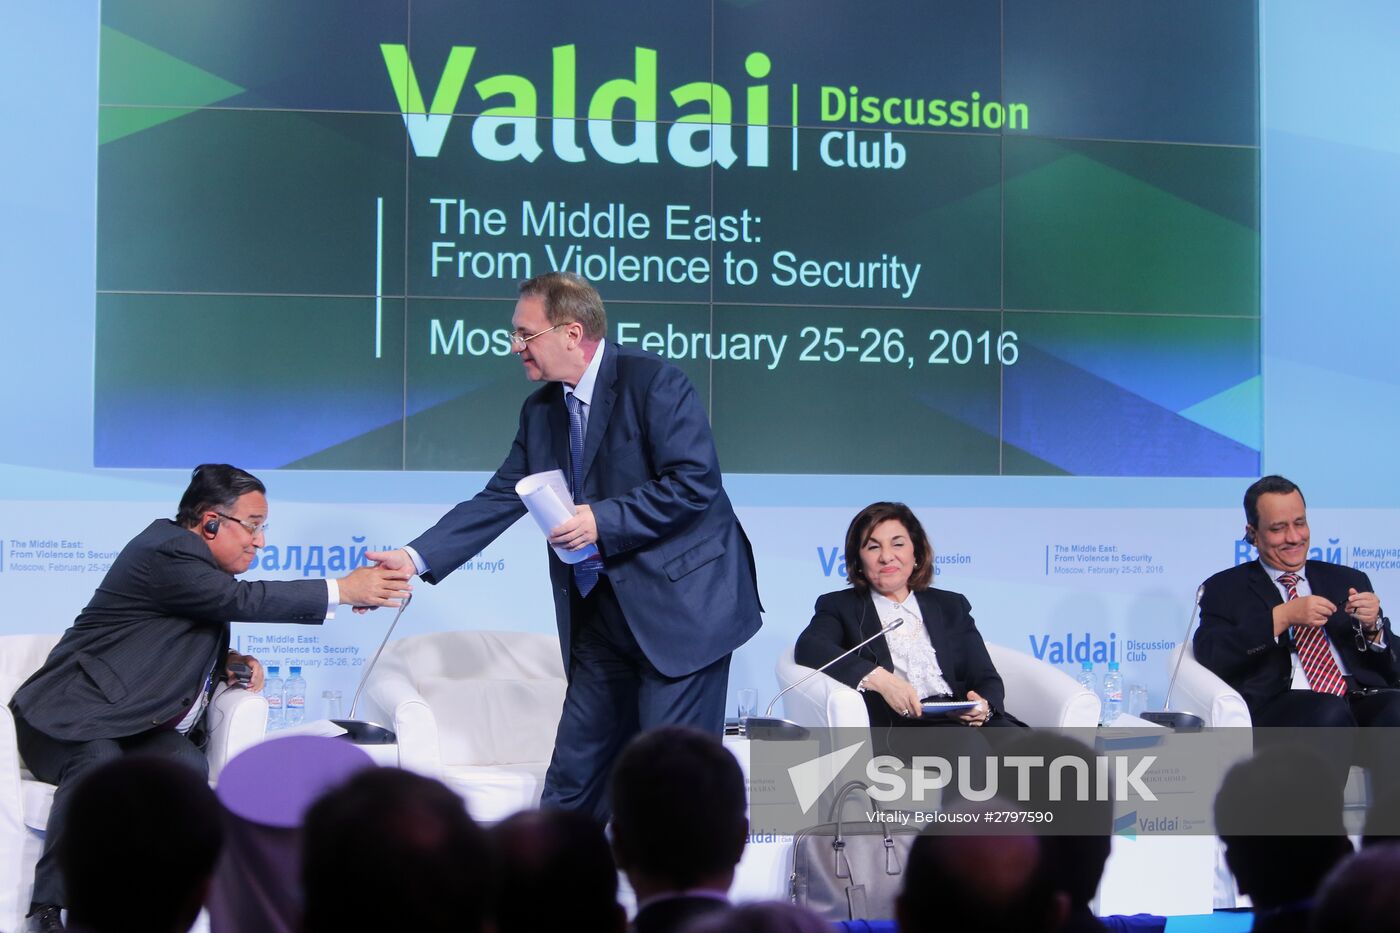 Valdai International Discussion Club conference